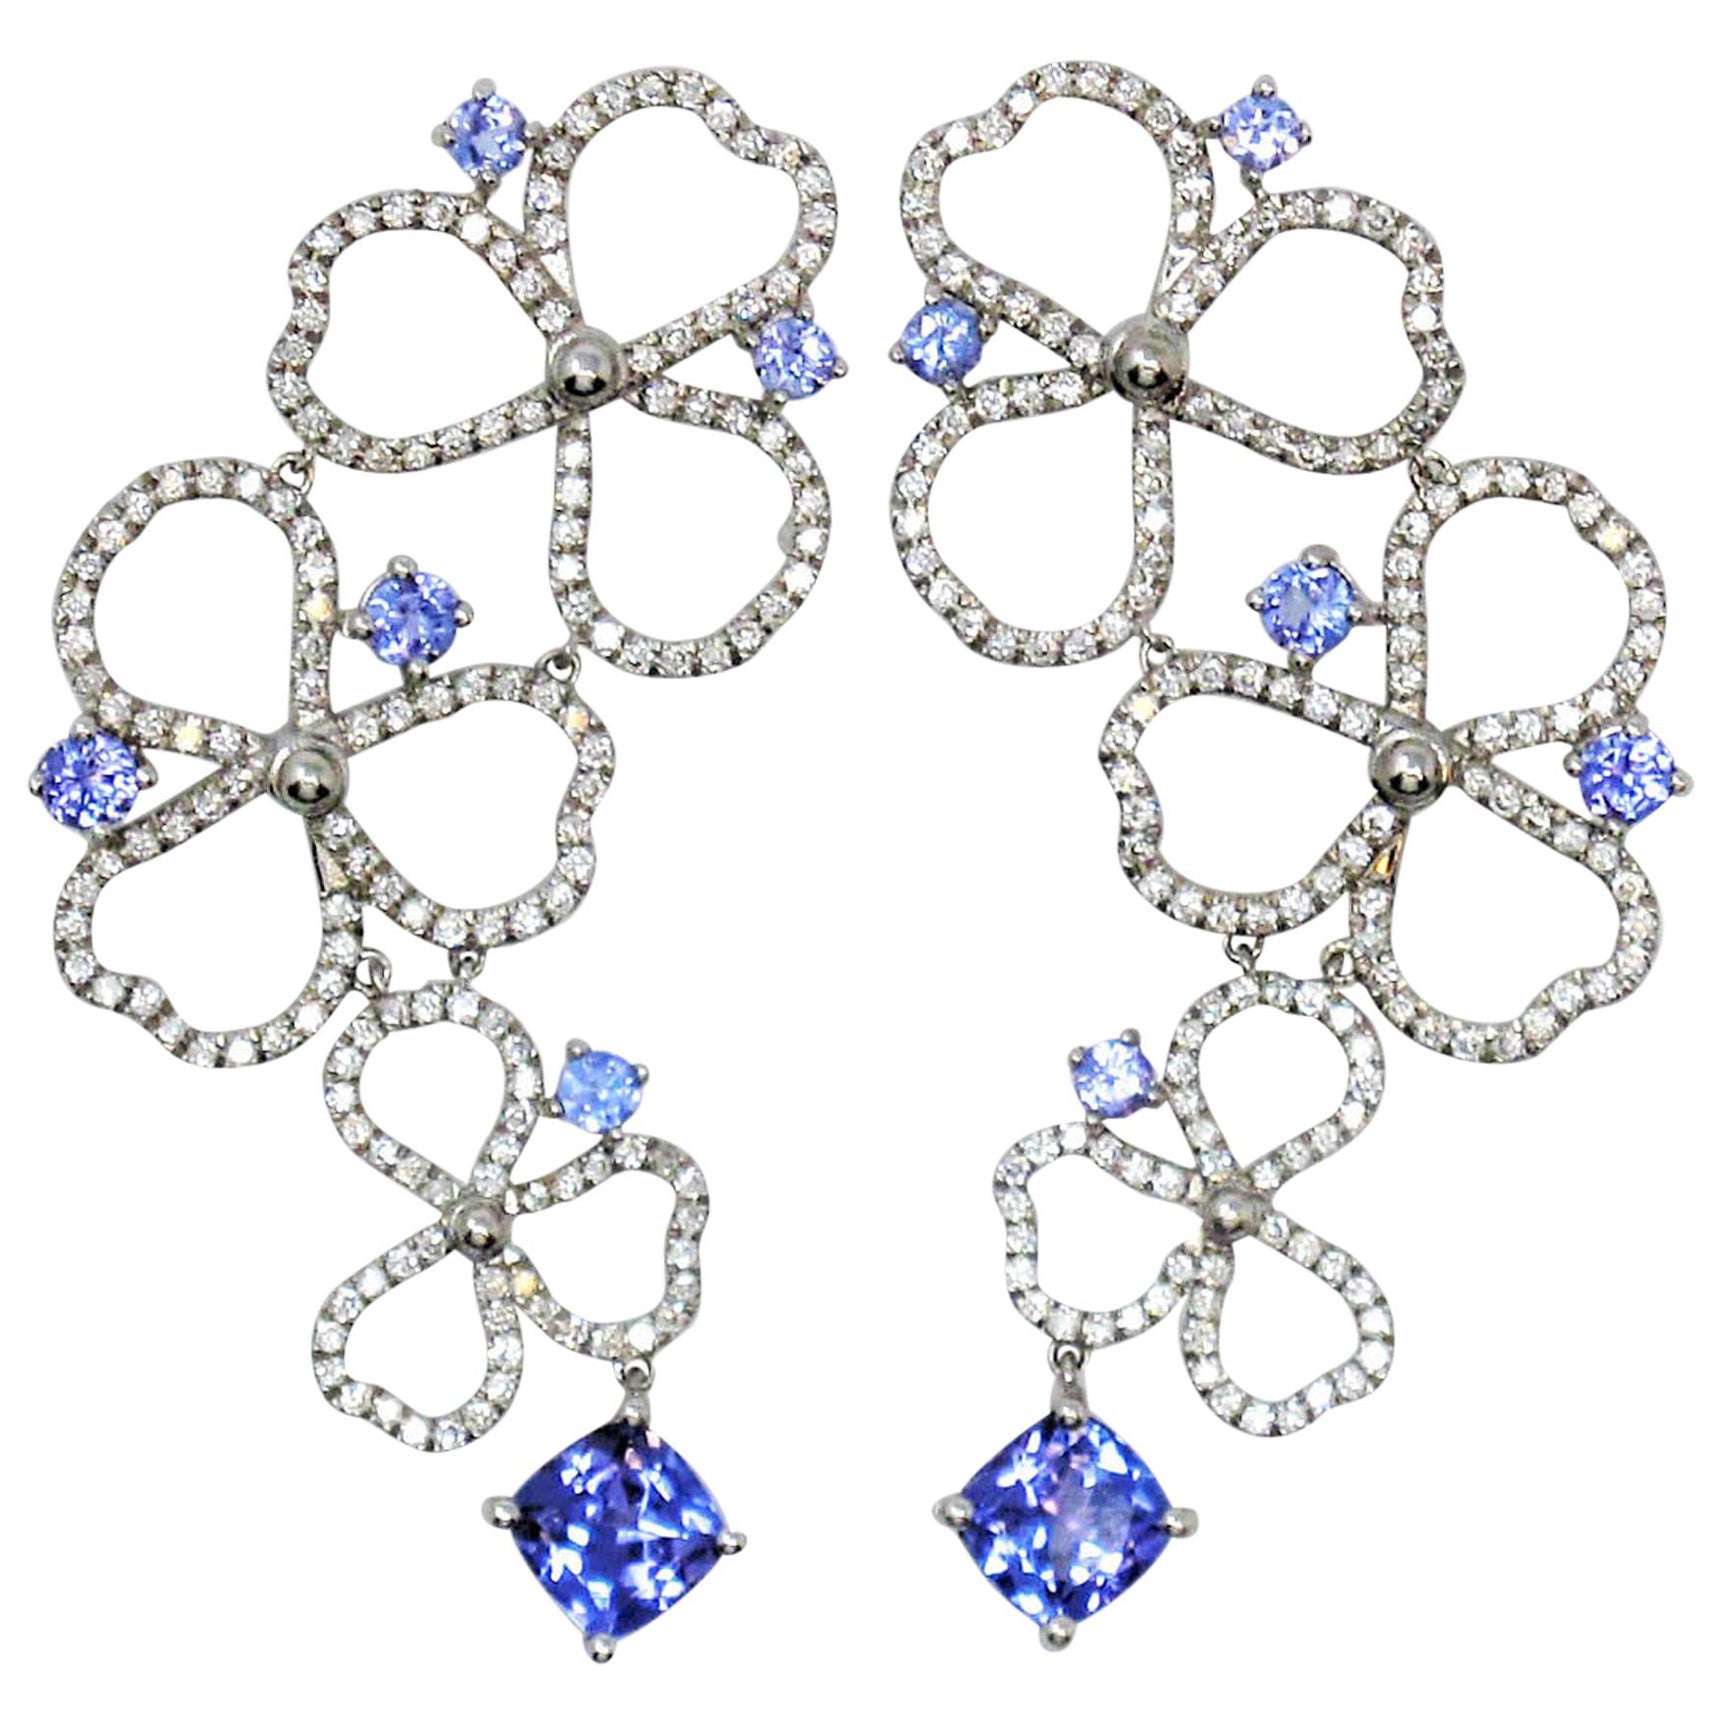 Tiffany & Co. Paper Flowers Diamond and Tanzanite Drop Earrings in Platinum